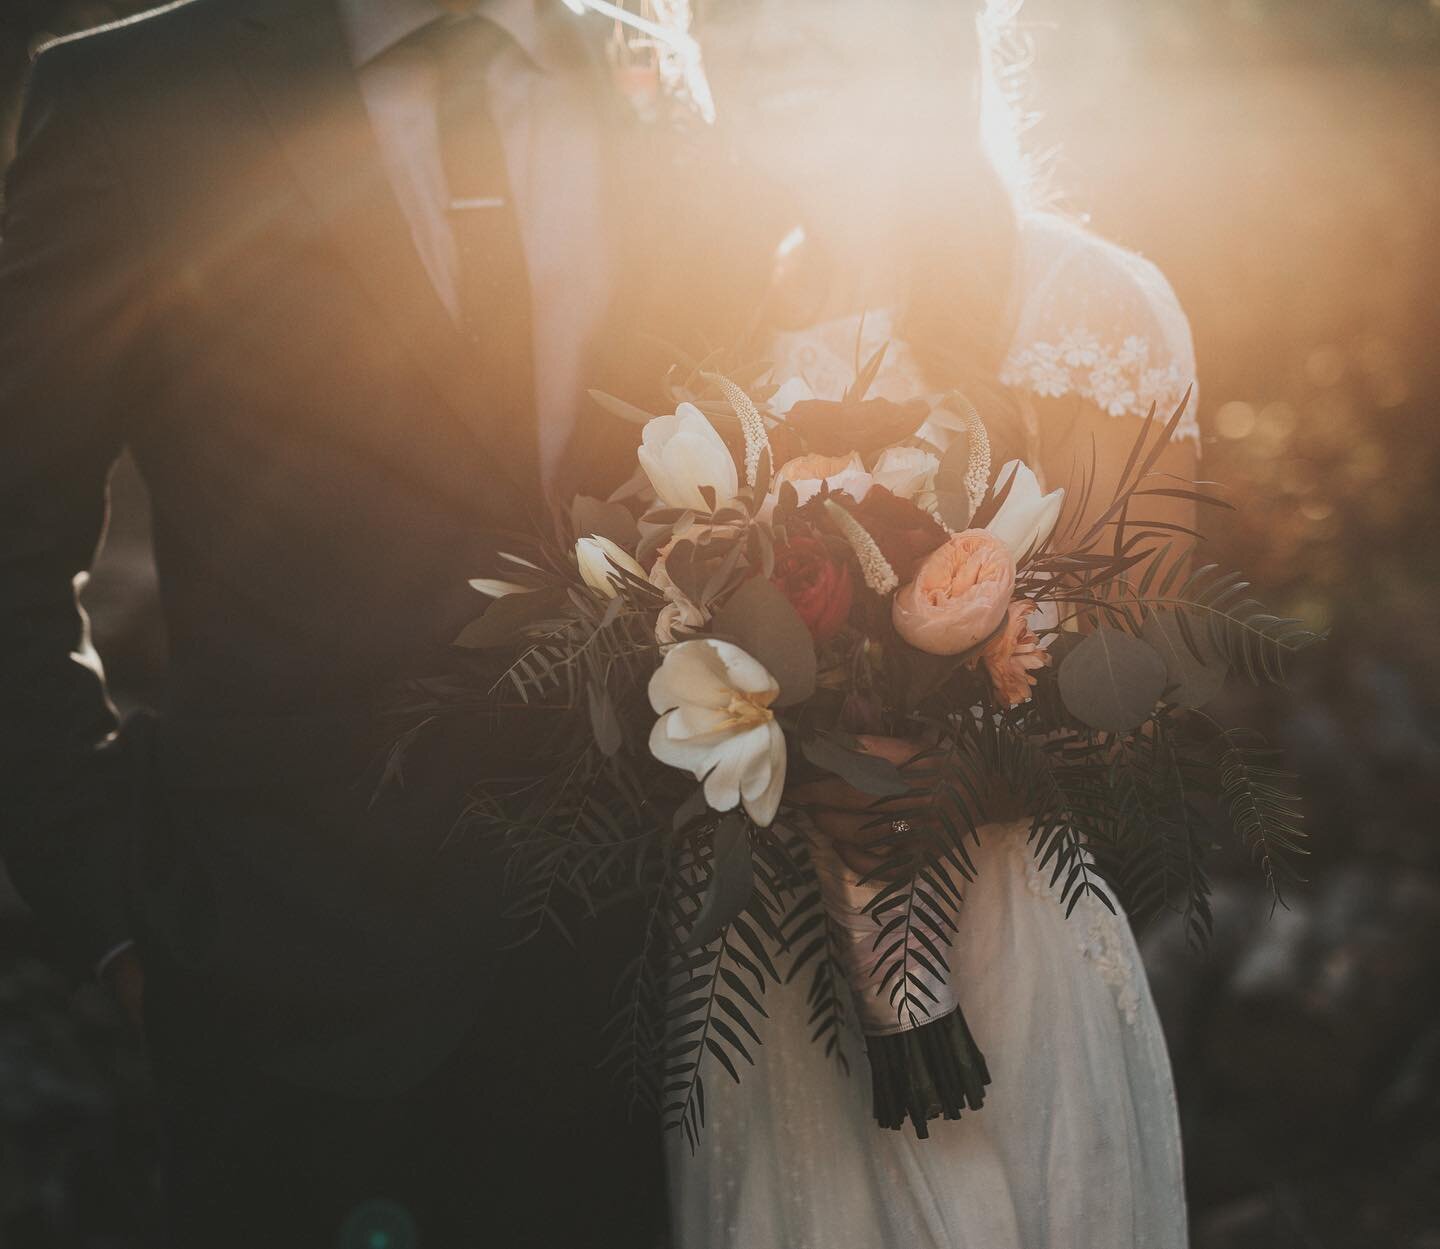 It&rsquo;s all in the details. ✨ A magical event starts with a magical location, and what&rsquo;s more magical than a golden summer afternoon?
.
.
.
.
#wedding #weddings #venue #party #partyvenue #weddingvenue #intimate #boutique #boutiquewedding #fi